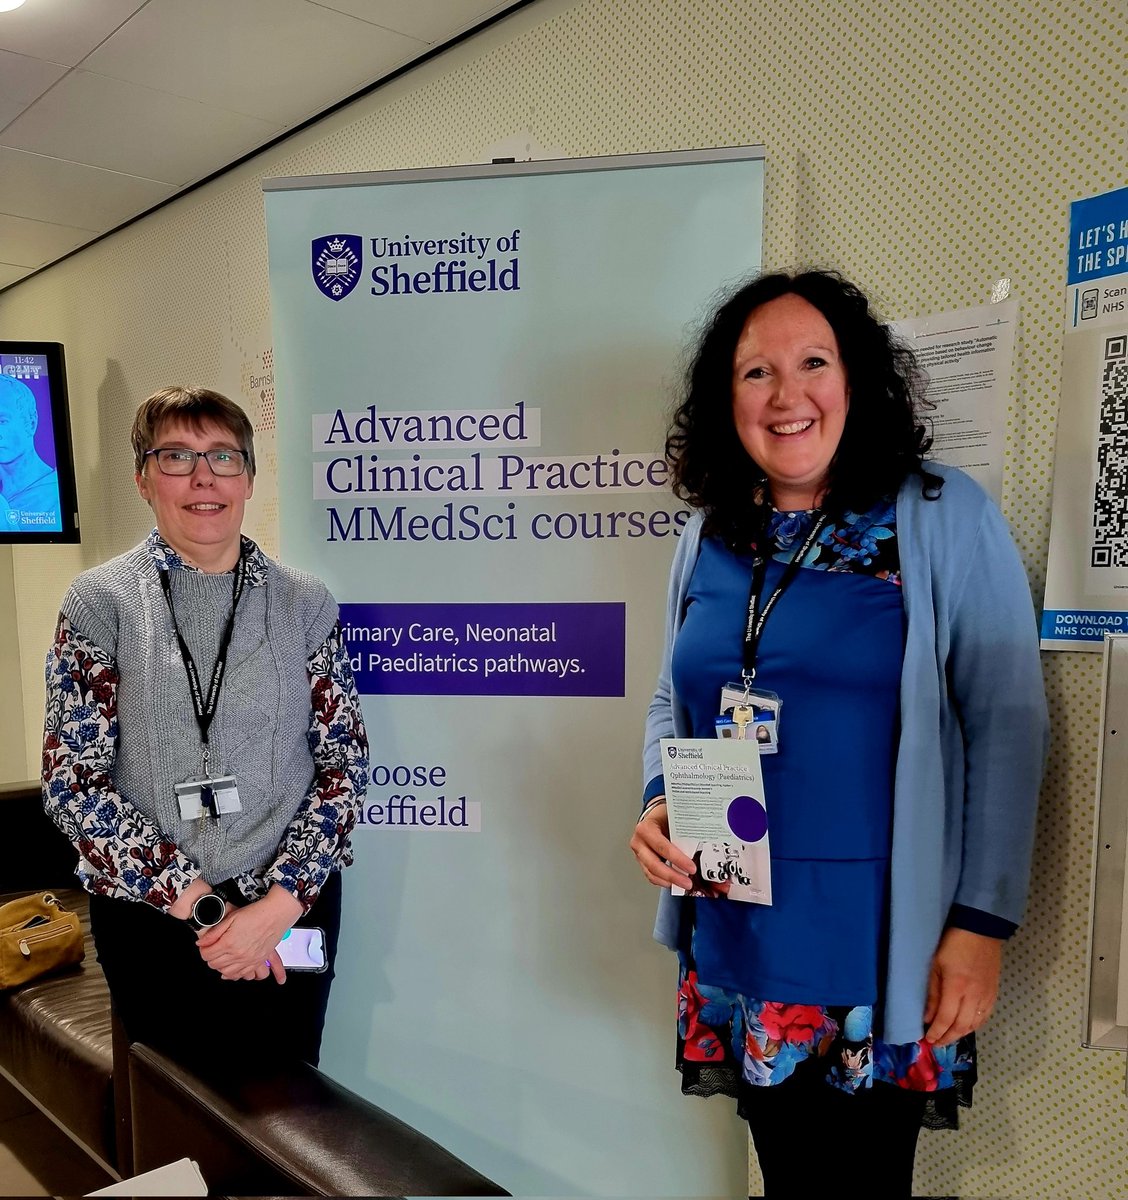 Interested in being an ACP?? COME SEE US! 
We are in the medical school, Hallamshire hospital with The University of Sheffield until 2pm.
Todays focus is particularly on General practice, Neonates, Peadiatrics & Opthalmology. @Sarahfish37 @CodinaCharlotte  @LizMill36234990